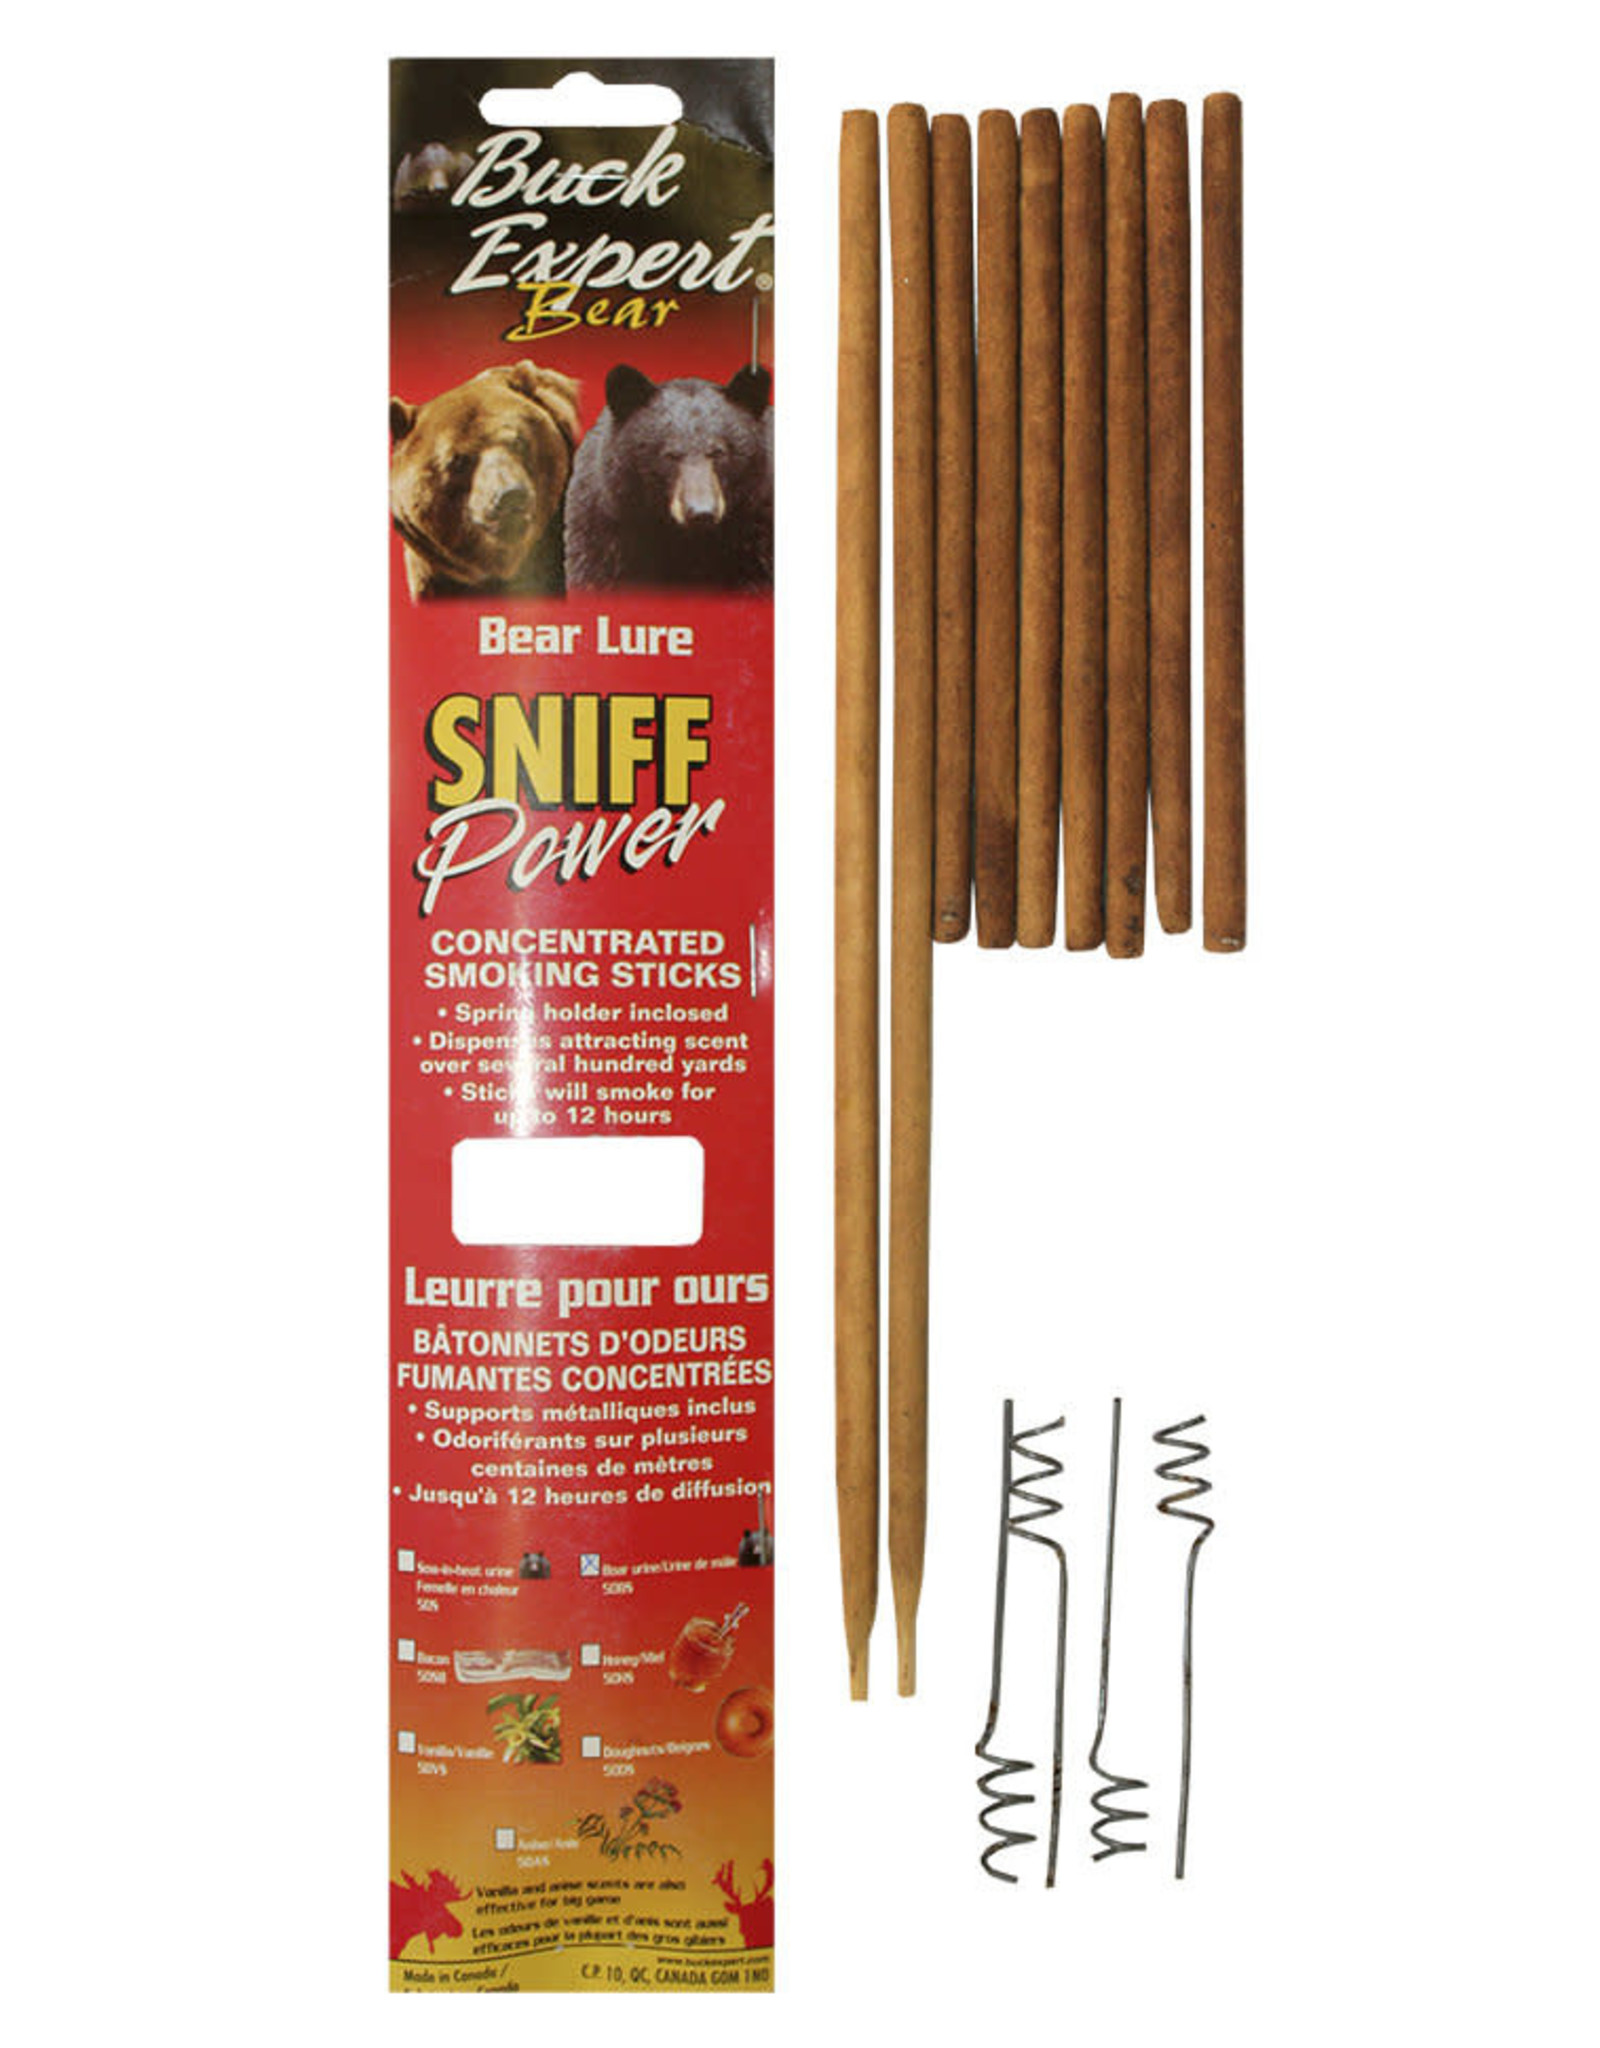 Buck Expert Bear Lure Sniff Power Doughnut Scent - Preeceville Archery  Products